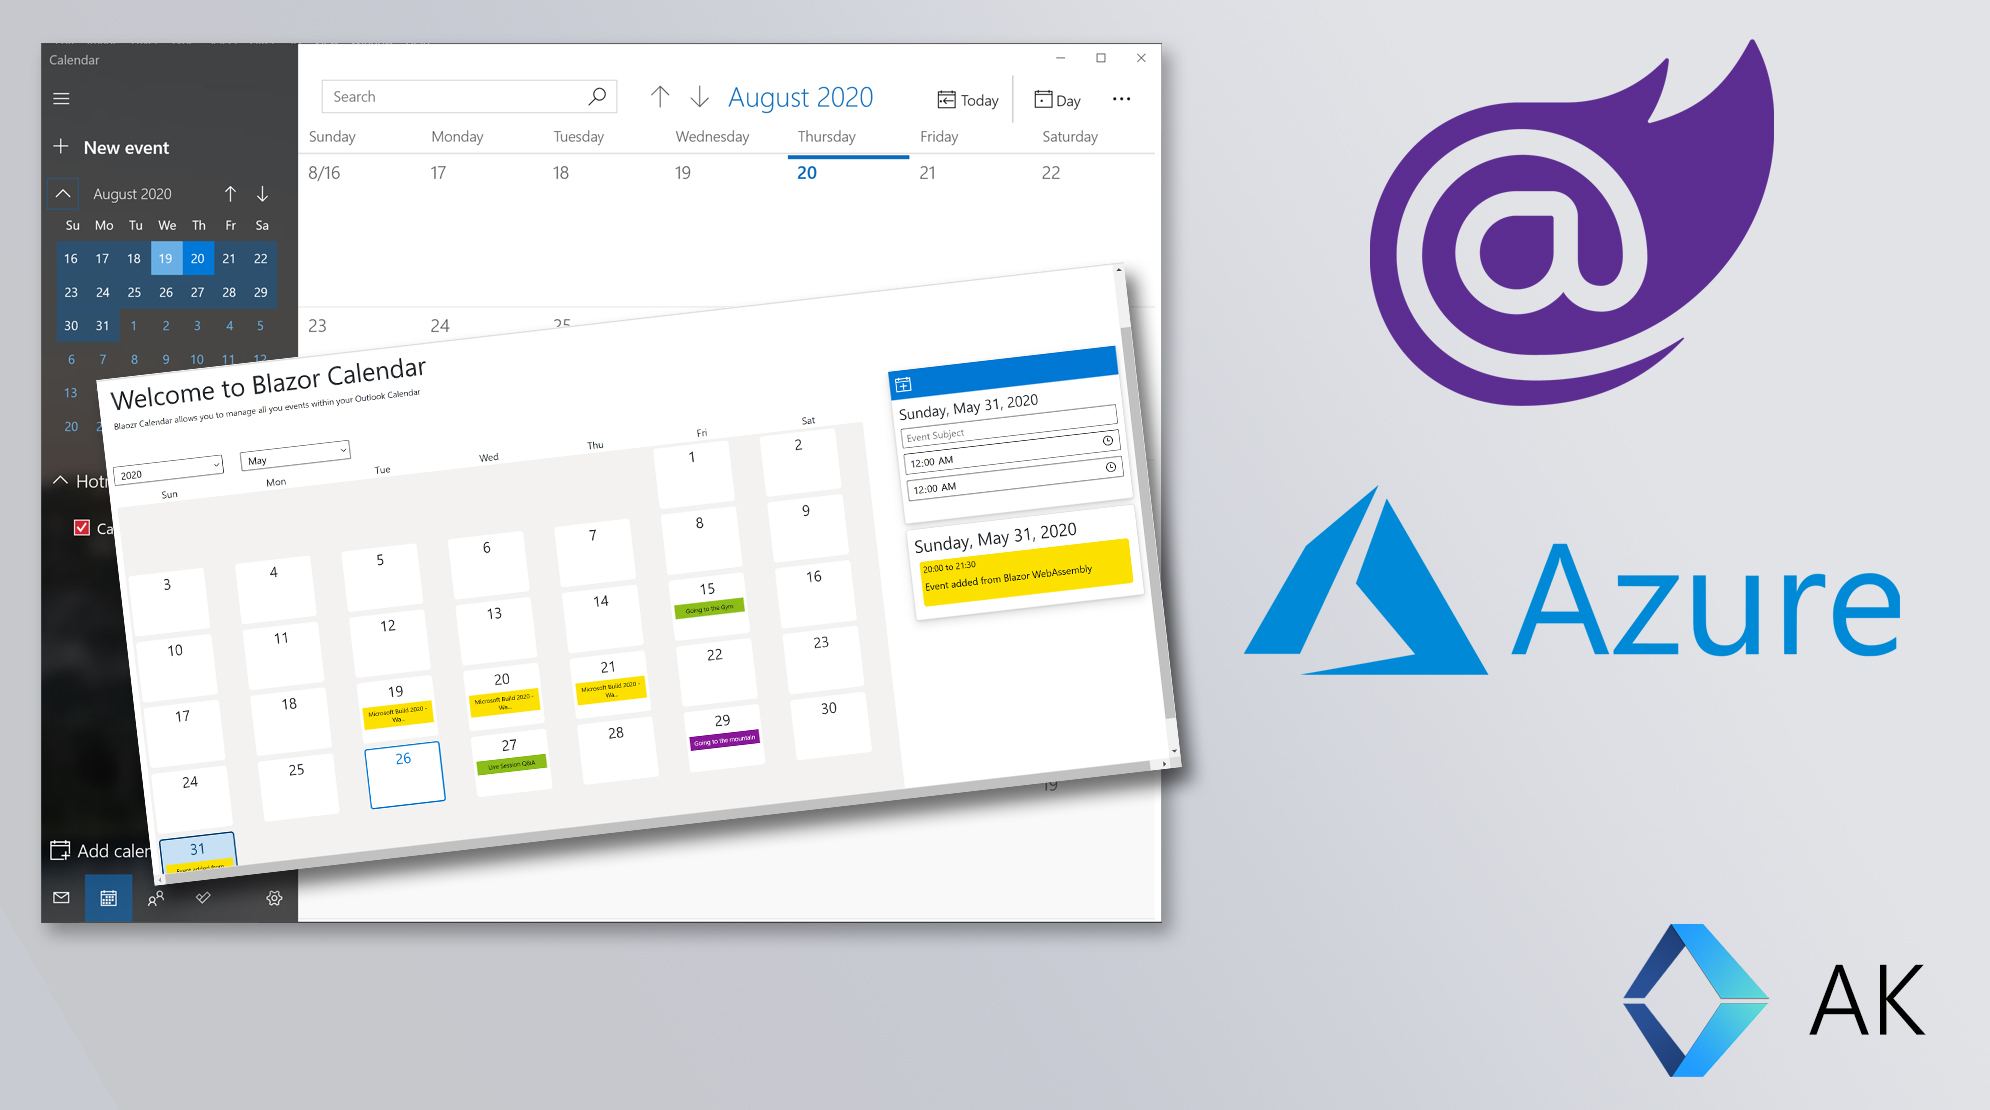 Developing a full Calendar Application with Blazor WebAssembly, Microsoft Graph and Azure Active Directory